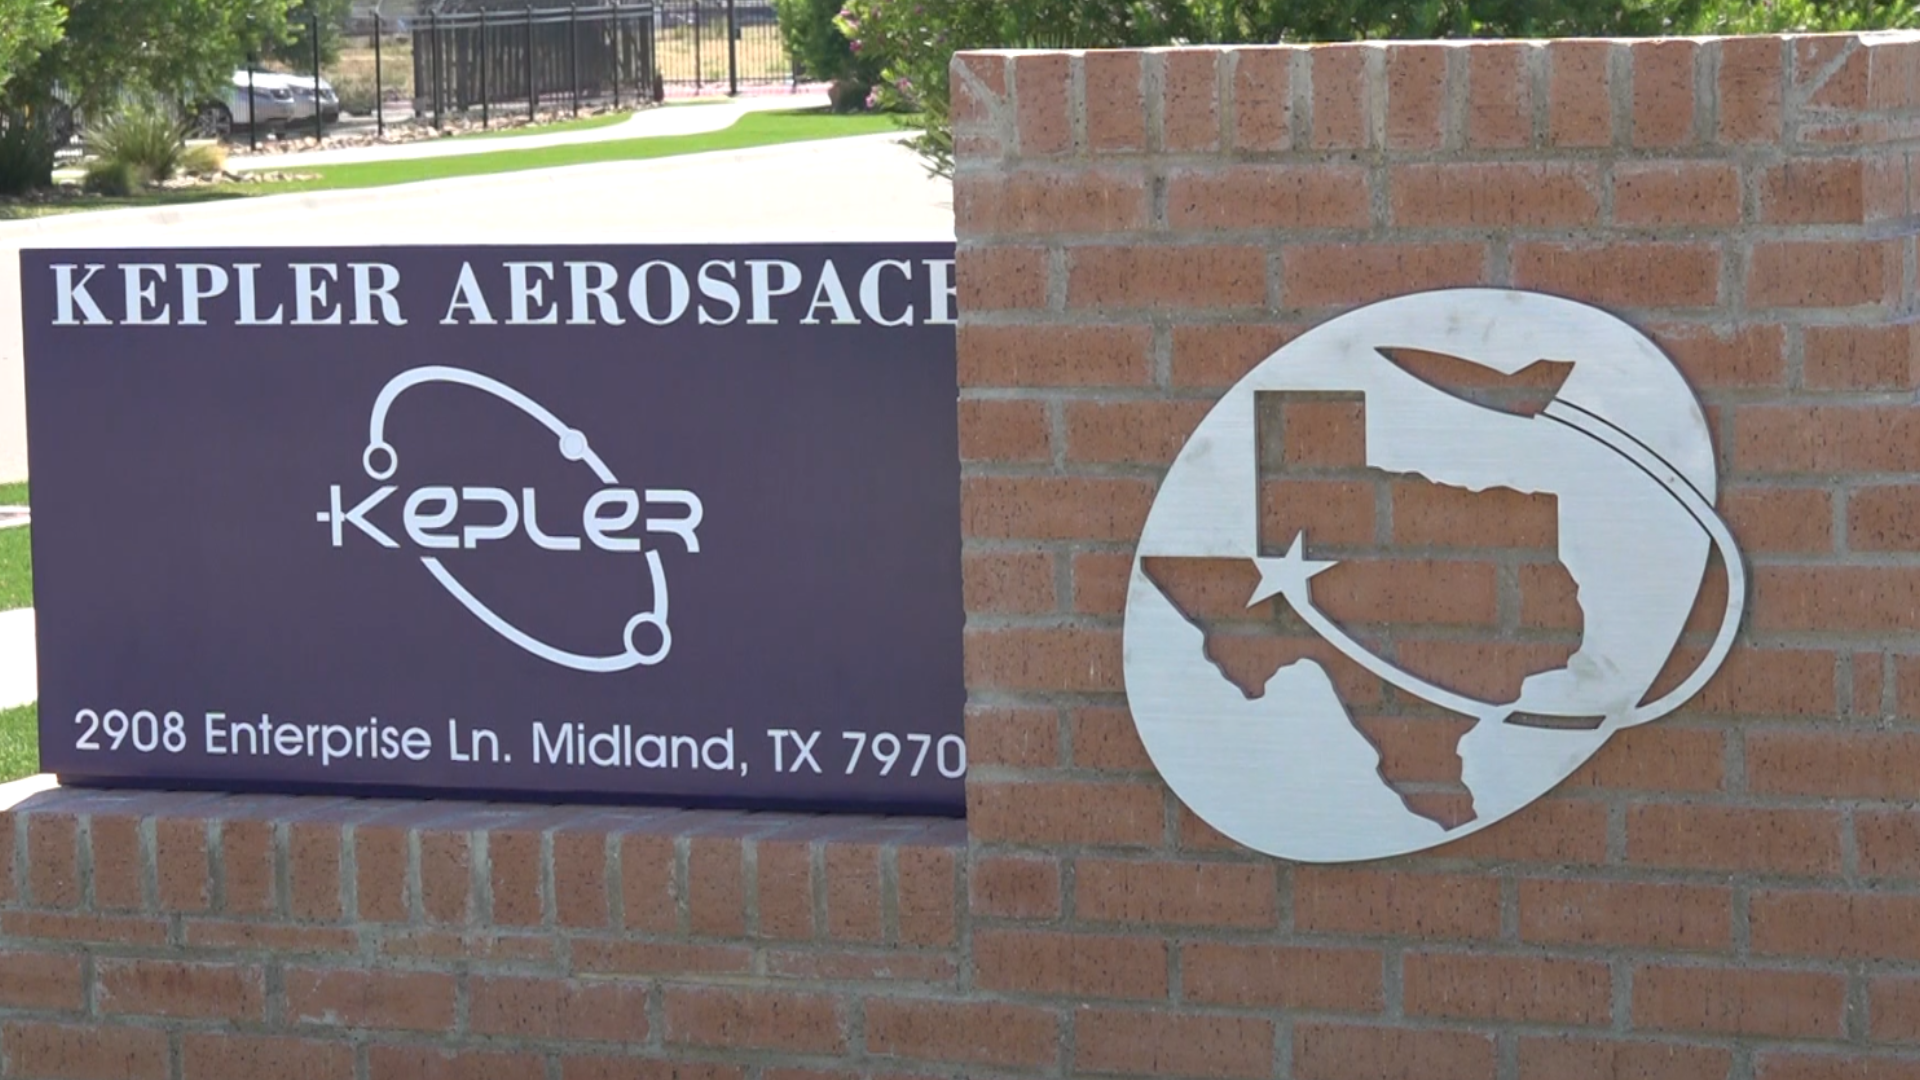 During the pandemic, a lot of industries lost money. However, the aerospace industry just keeps growing, including in the Permian Basin.